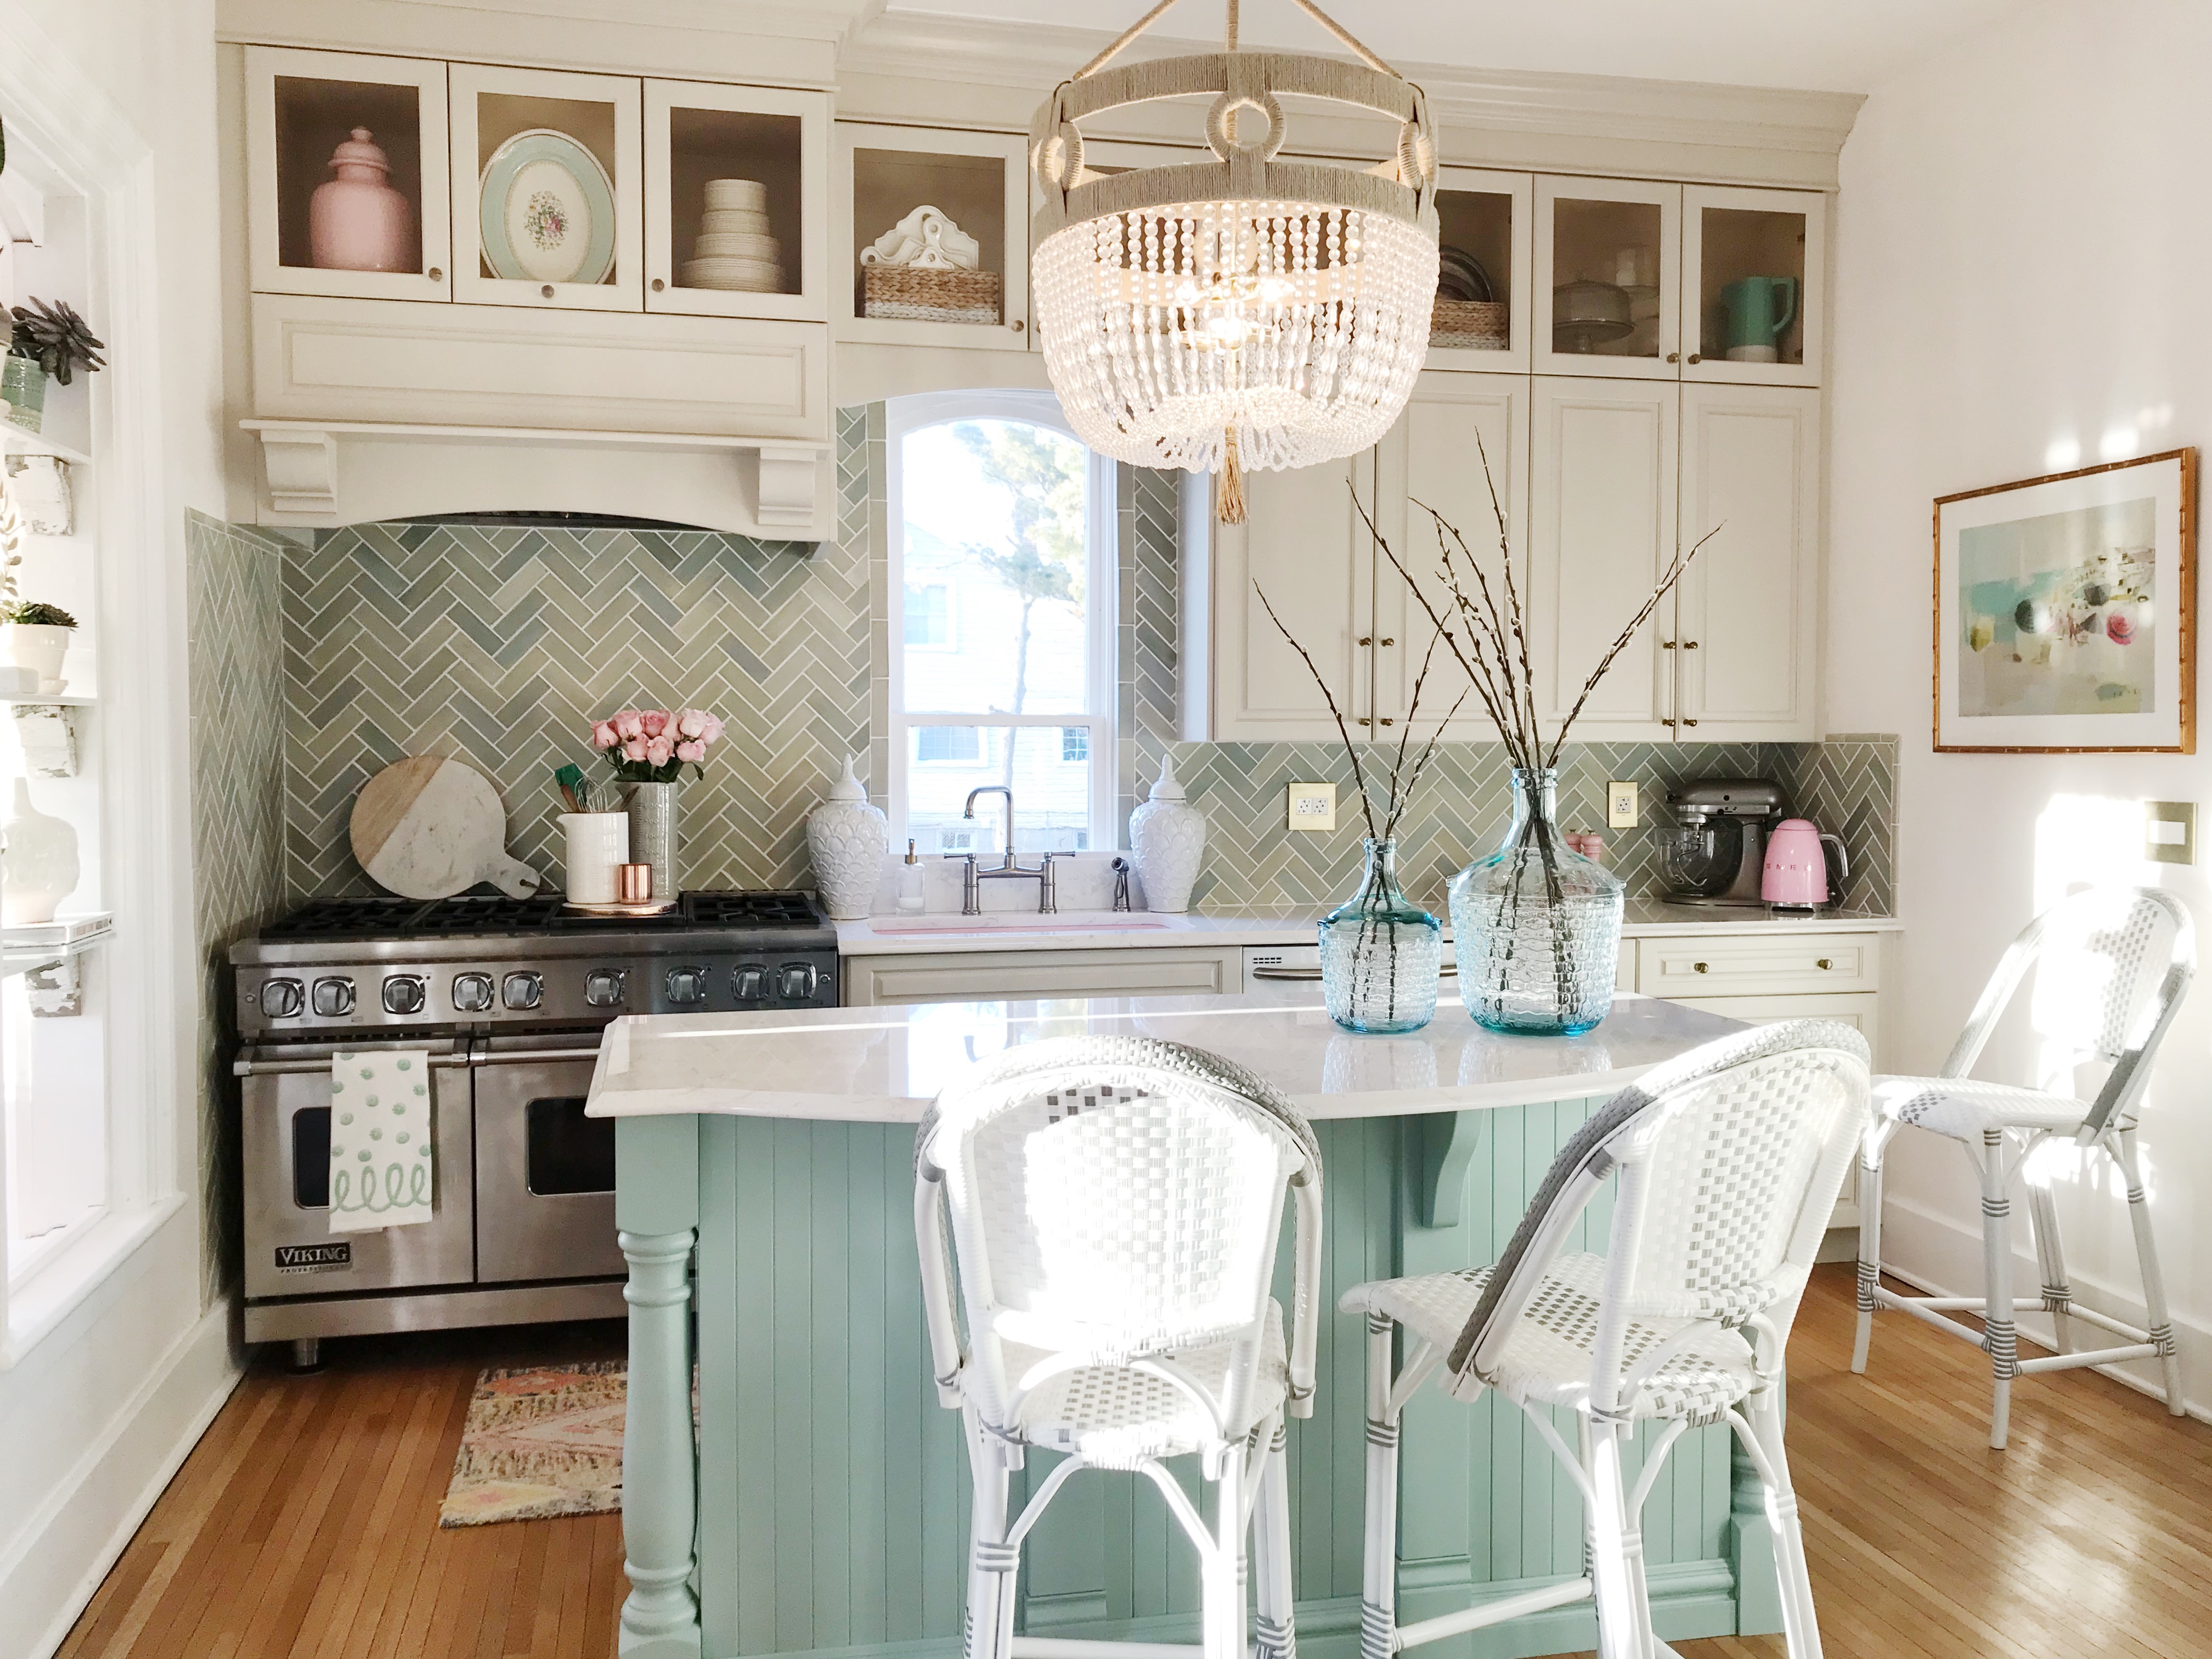 https://thelesliestyle.com/wp-content/uploads/2018/03/spring-kitchen-accessories-the-leslie-style-frankie-malibu-chandelier.jpg